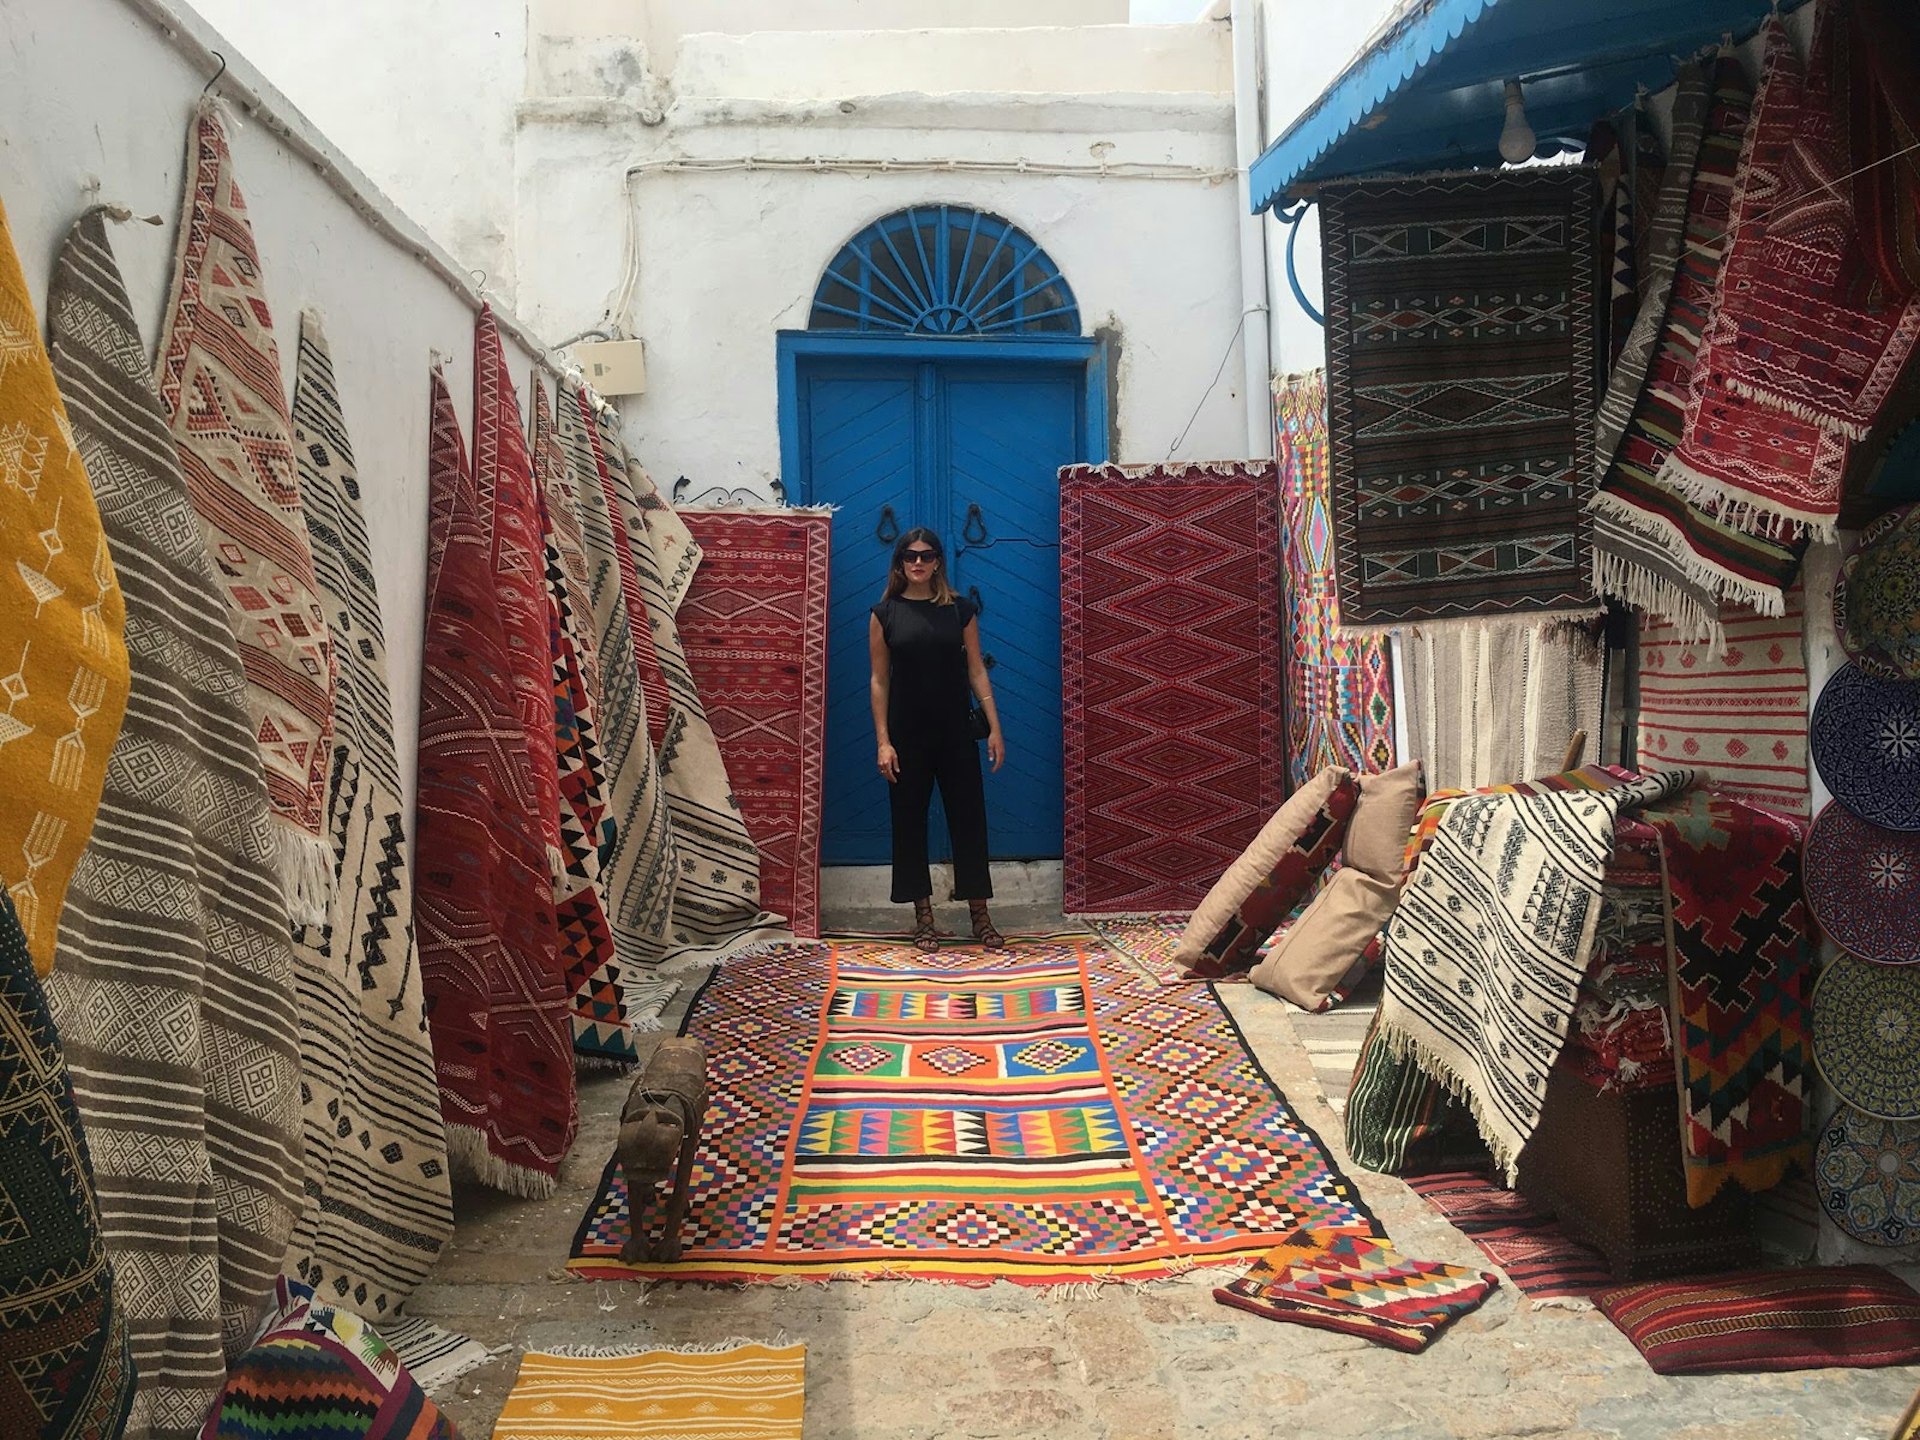 Erin shopping for traditional carpets in Sidi Bou Saïd © Erin Harvey / Lonely Planet